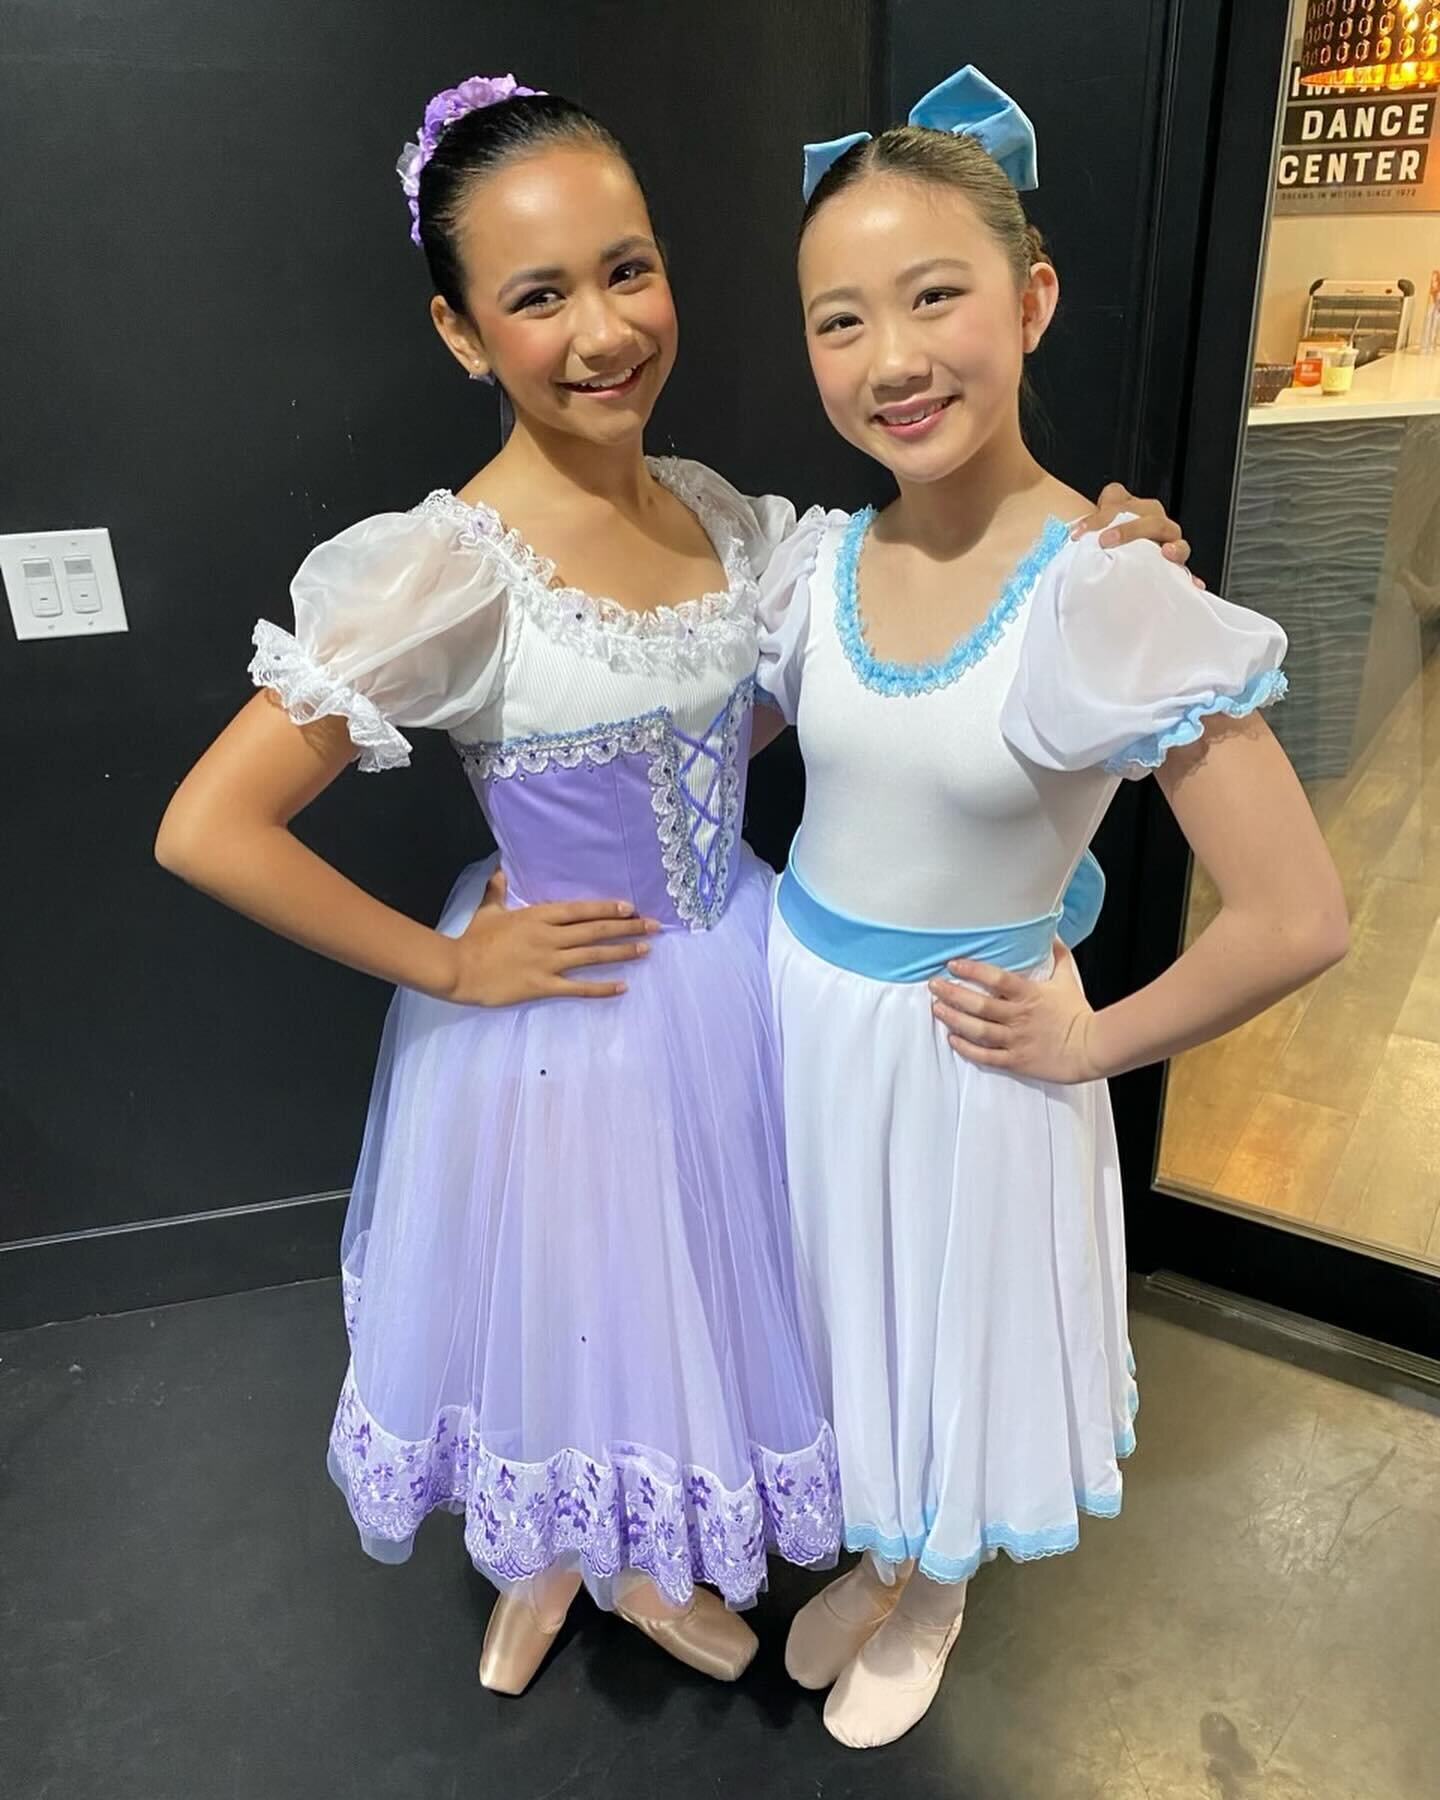 Please help us wish our Impact Classical soloists Trinity, Abigail S, Emily, Abigail H, Evy and Violet good luck in this weekend&rsquo;s Youth Ballet Masters competition, we&rsquo;re so excited to see you all shine onstage! 
@youthballetmasters